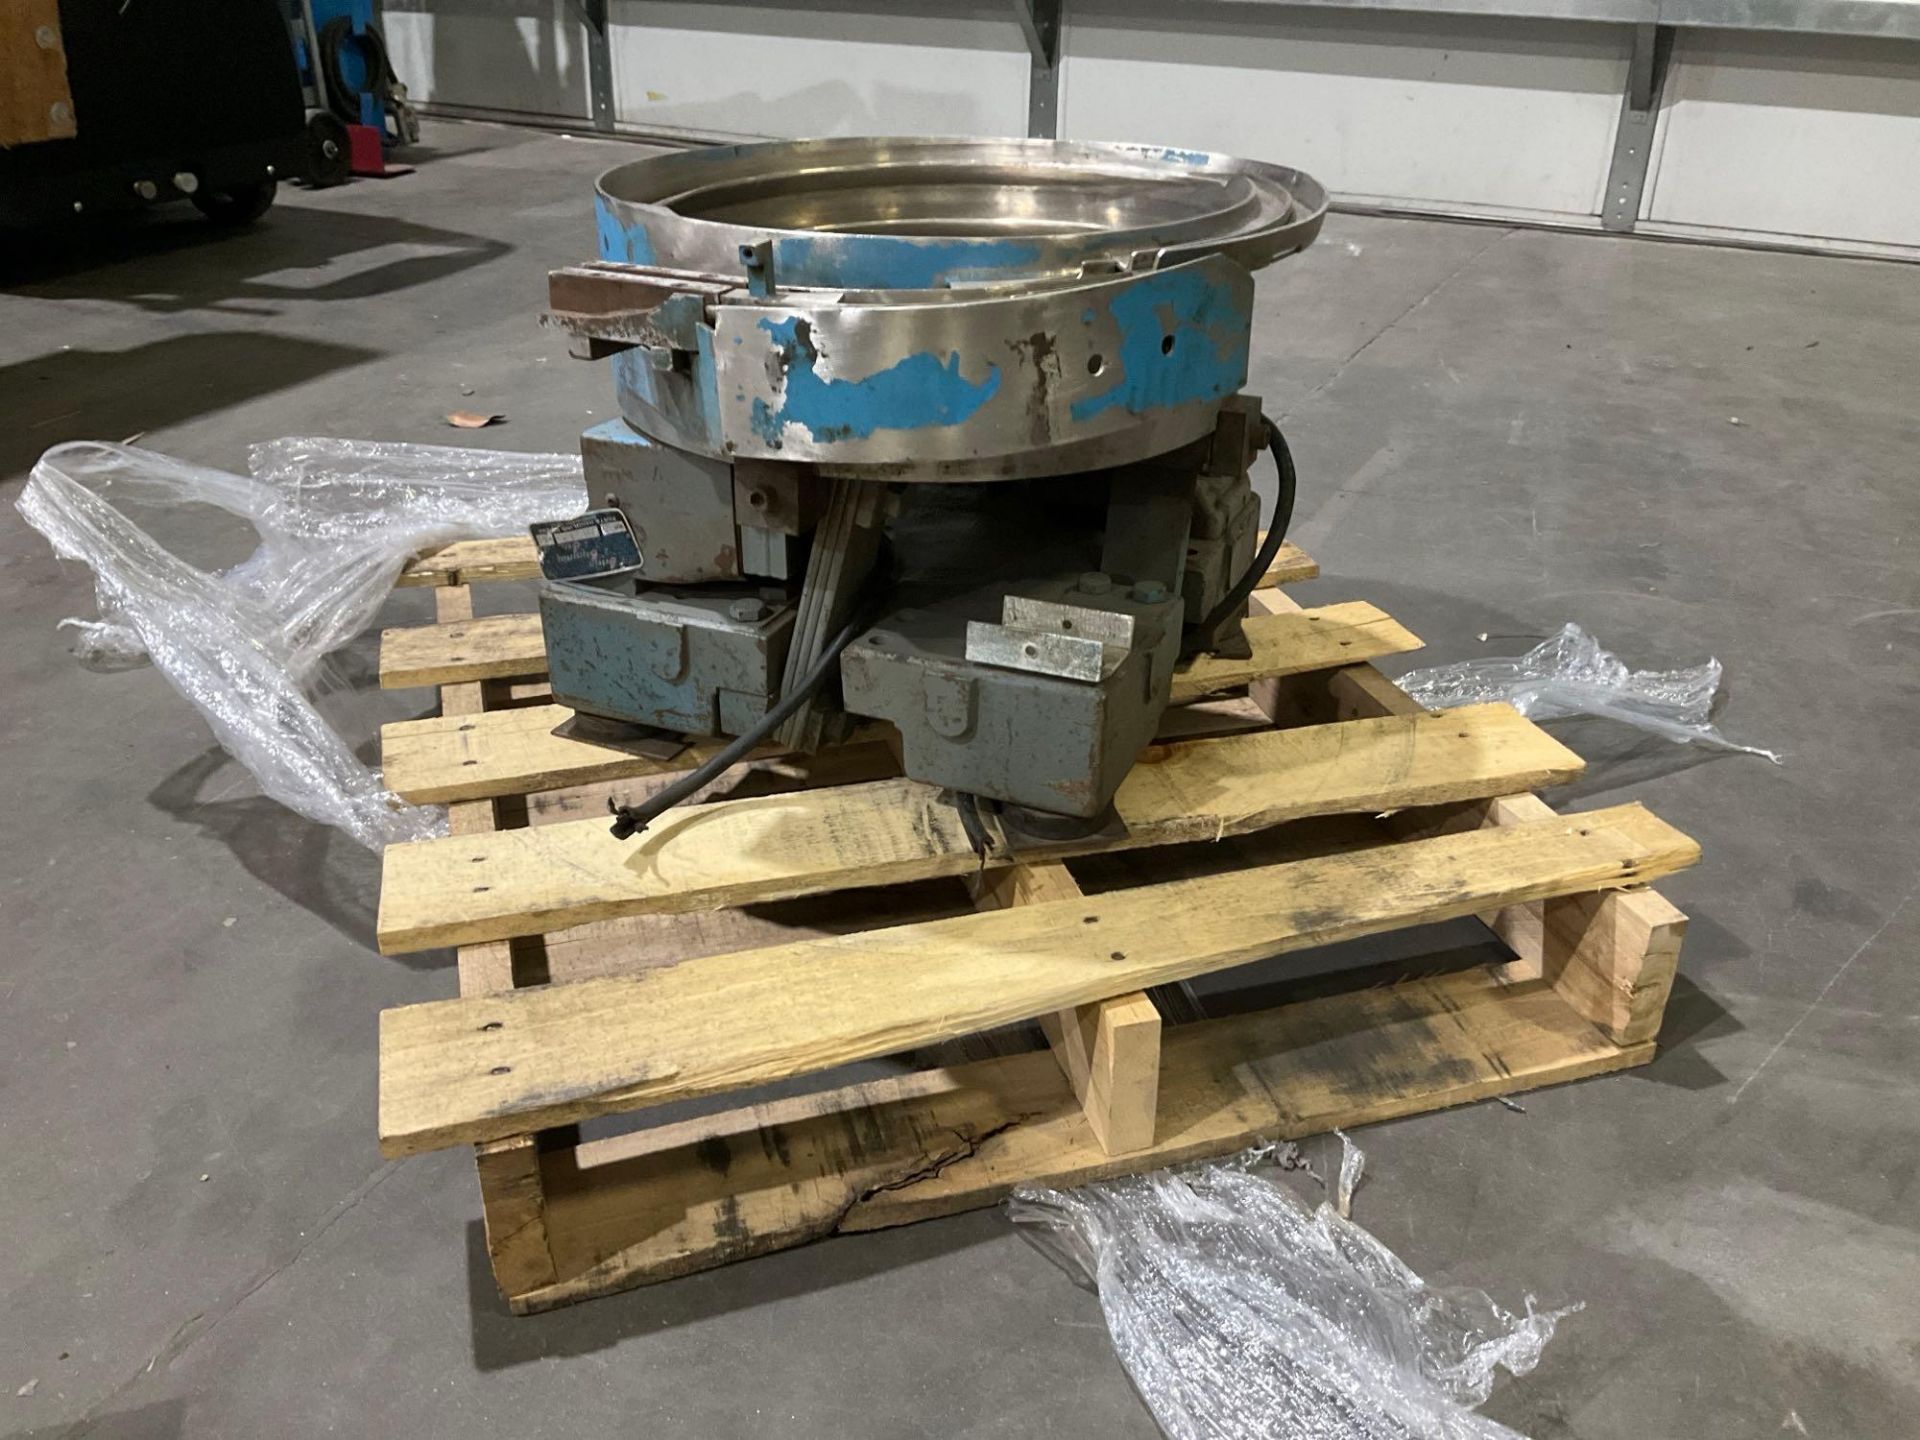 SERVICE ENGINEERING VIBRATORY PARTS HANDLING SYSTEM, CONDITION UNKNOWN - Image 6 of 9